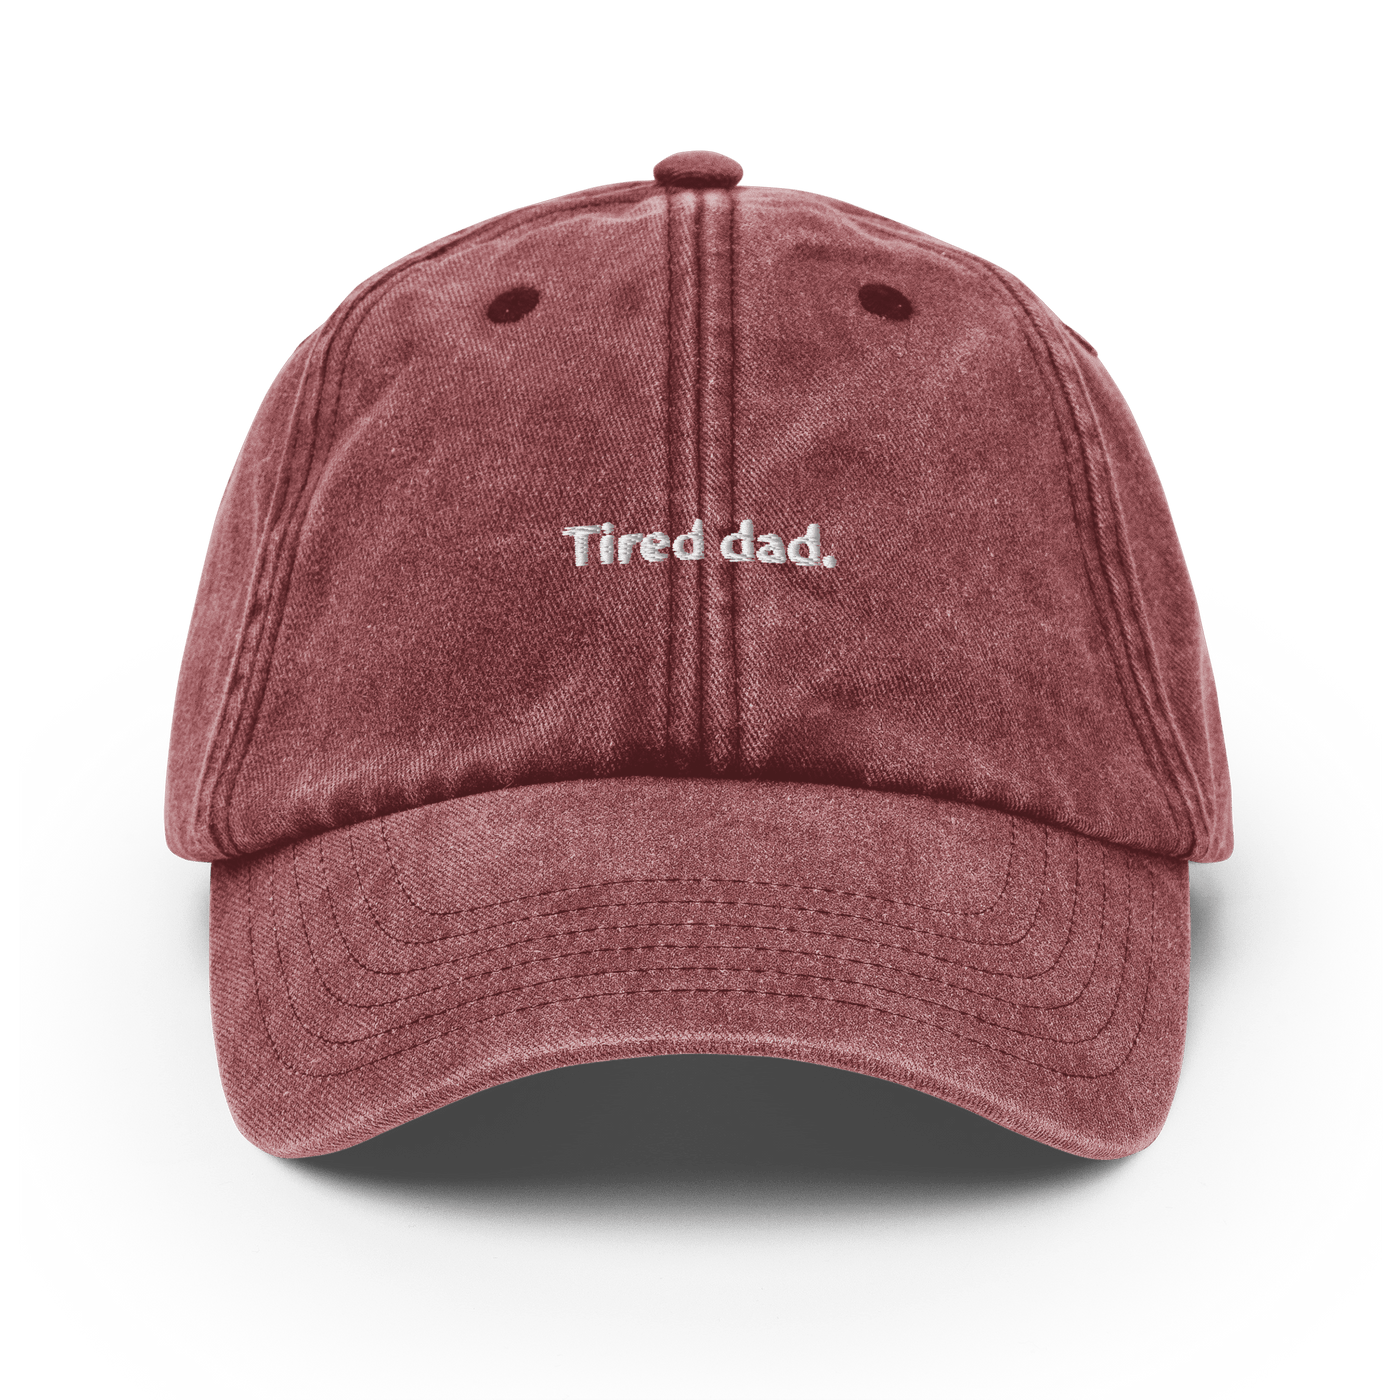 Tired dad Vintage Hat - Vintage Red - - Just Another Cap Store